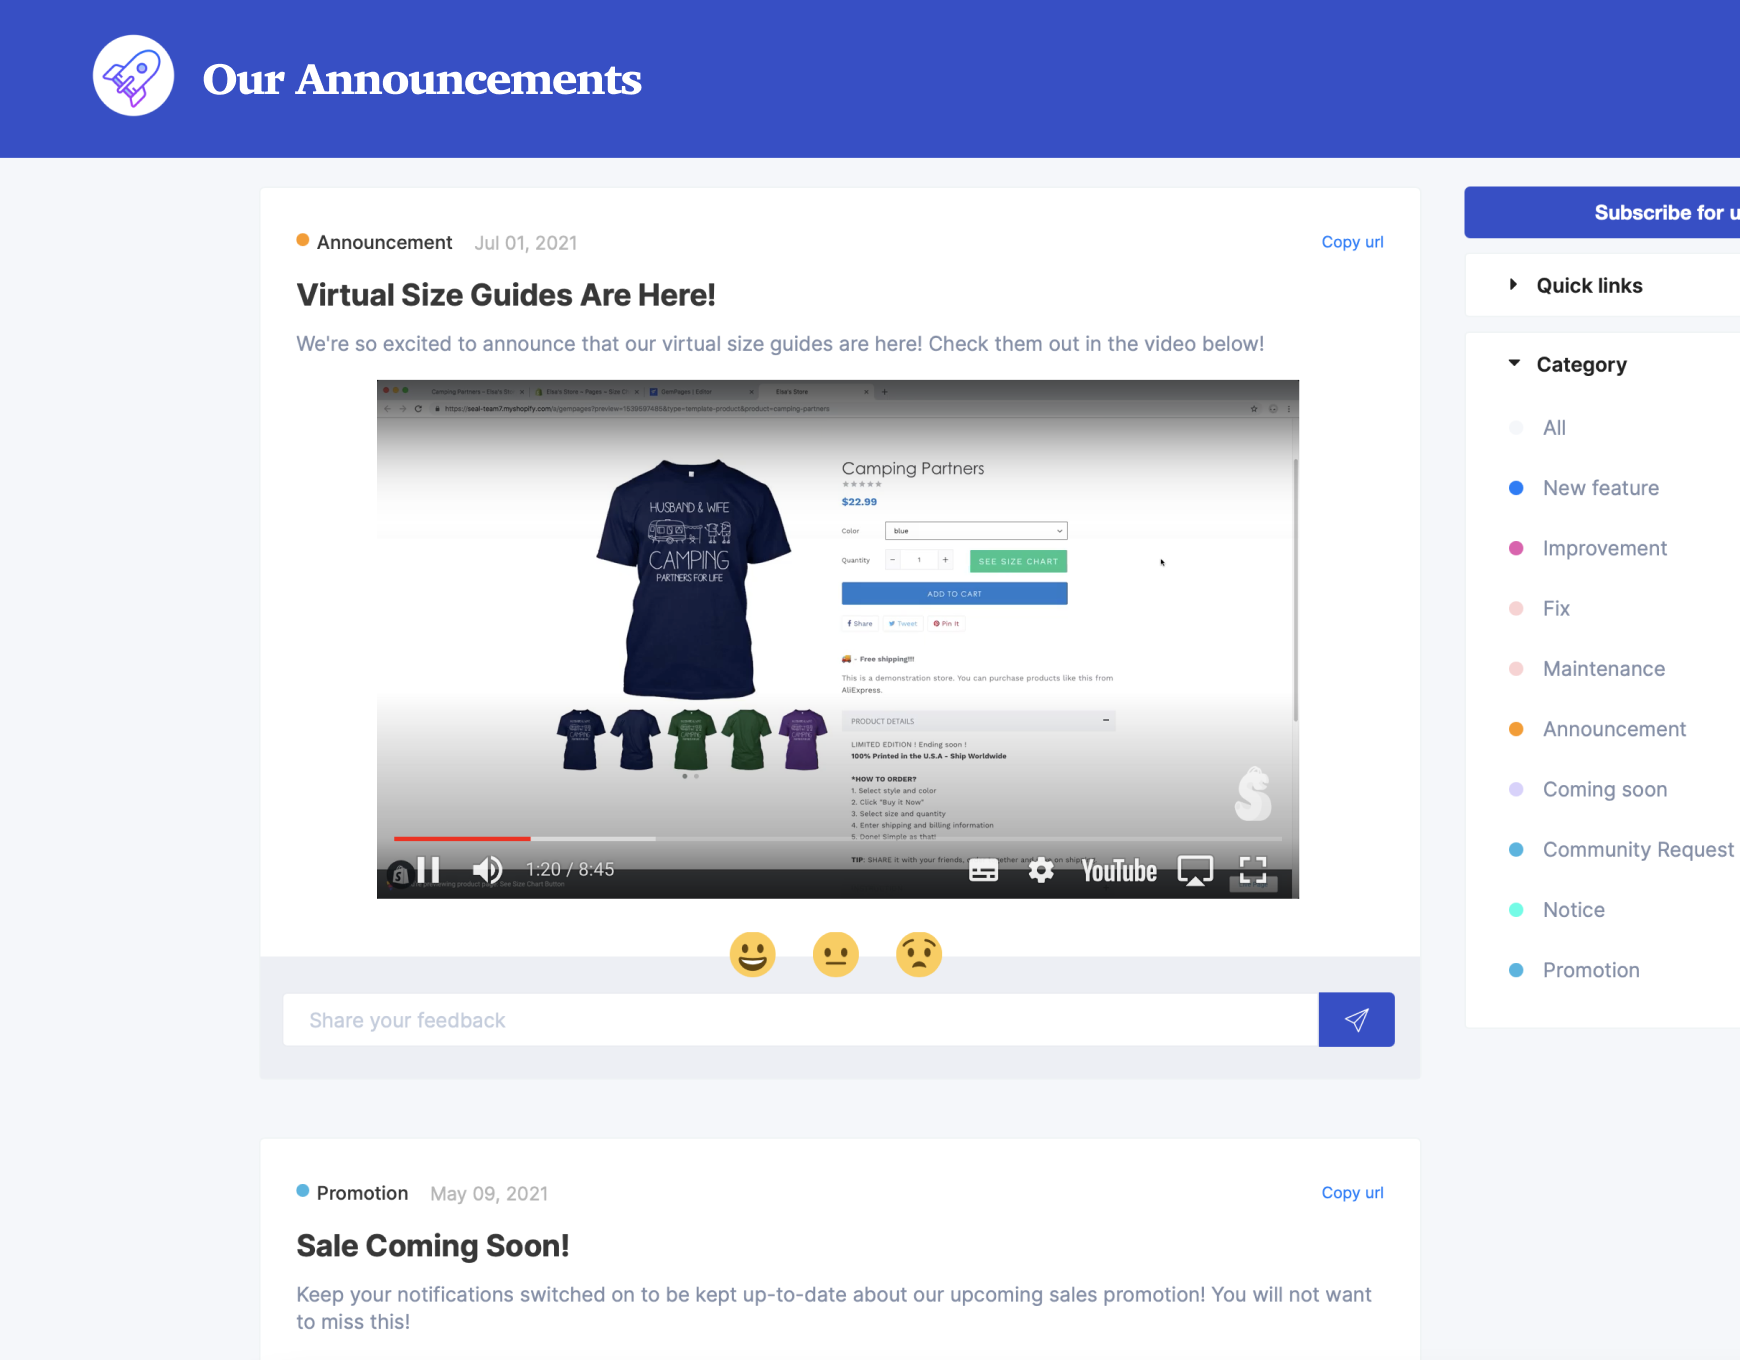 Publish product updates and announcements